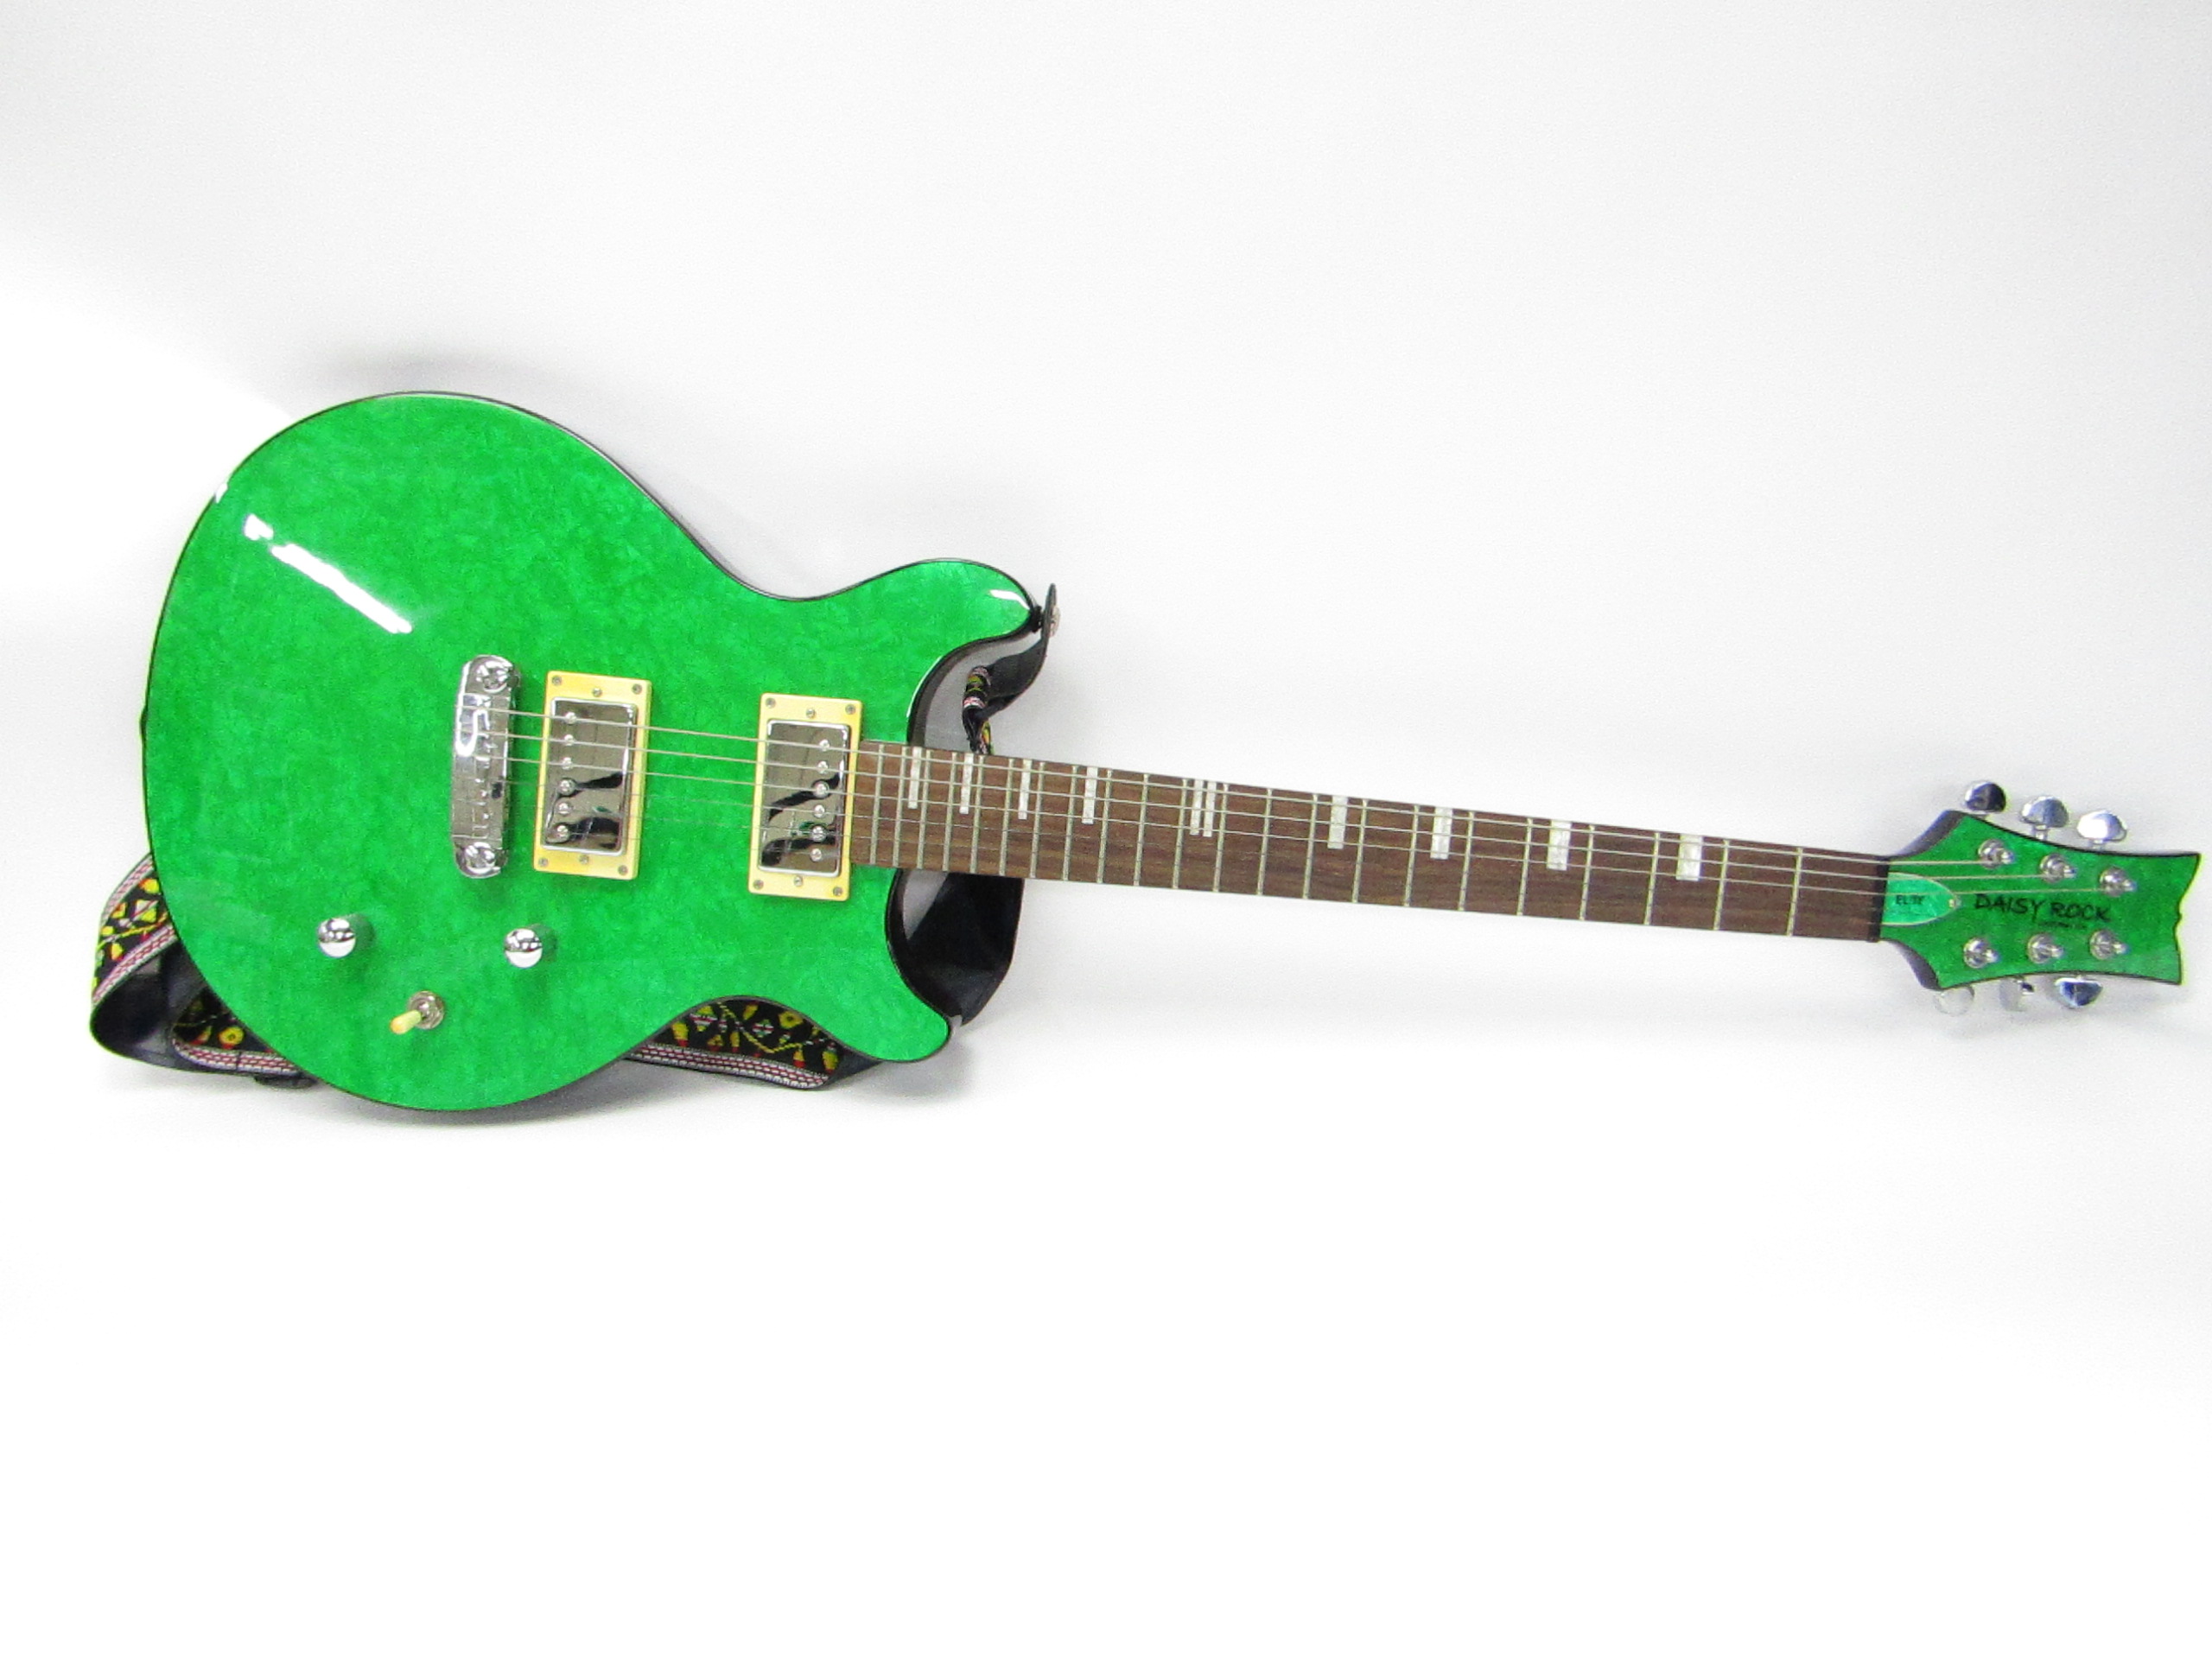 Daisy Rock Elite Green Flake Right Handed Six Stringed Electric Guitar